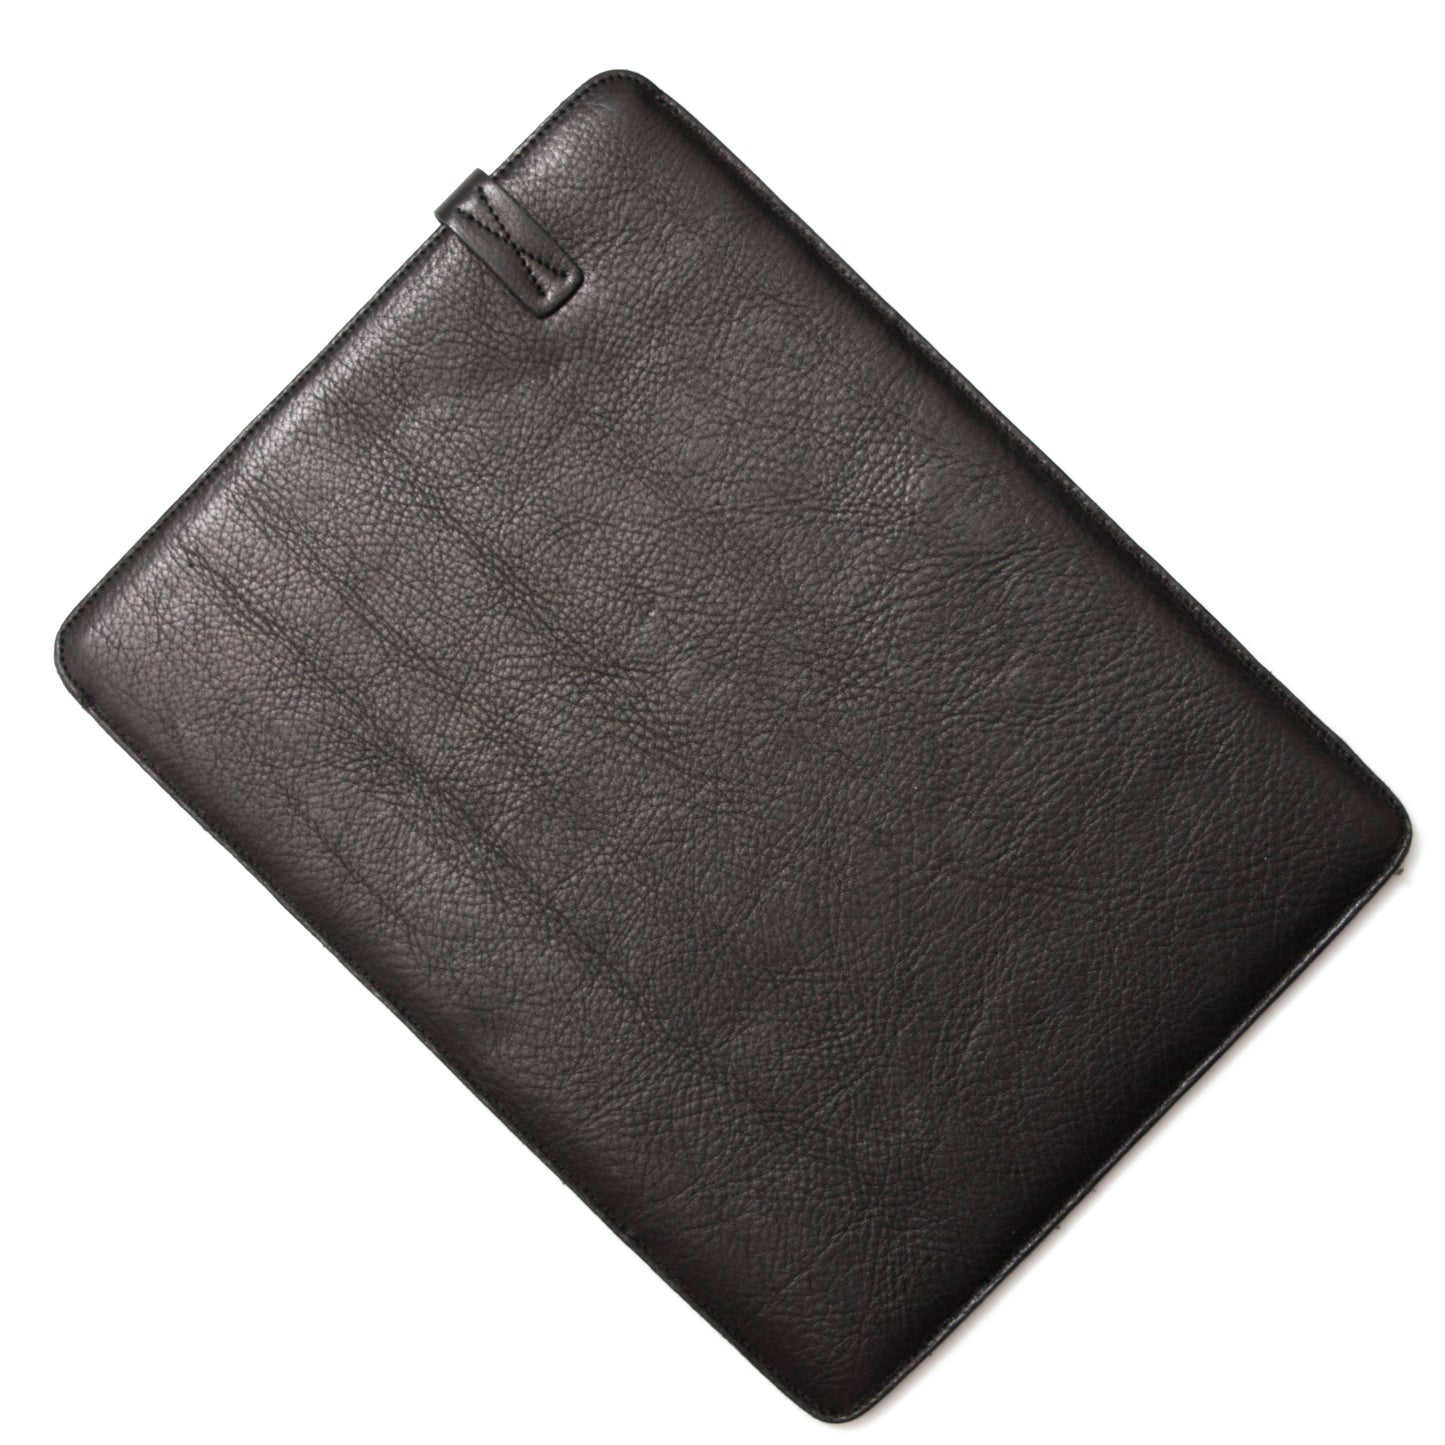 Luxurious Full-Grain Genuine vegetable-tanned Leather/Felt for MacBook Air 13"M1/M2/M3/Macbook Pro 14"M3/M1/M2/M3 Pro/iPad Pro 12,9"M2/Notebook Sleeve, 1 magnetic Clasp.- 1007